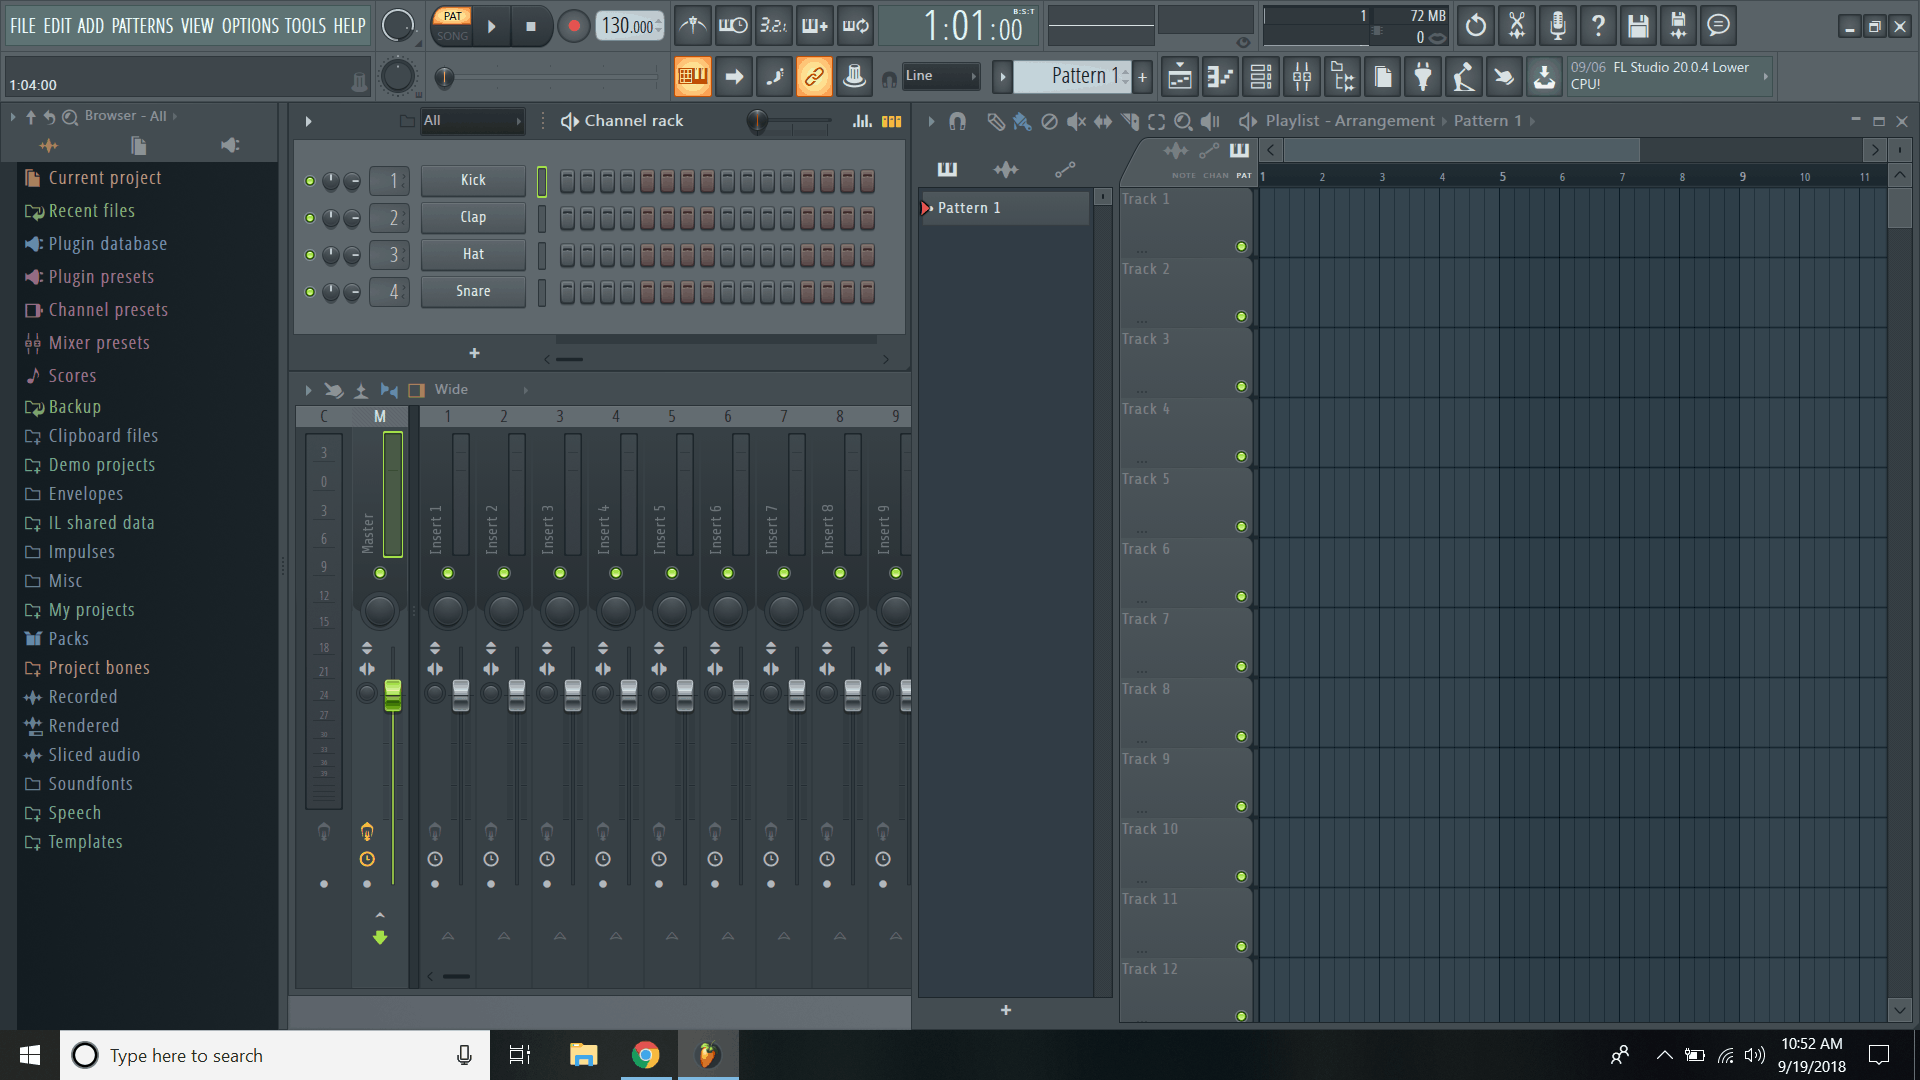 fl studio could not save to the file